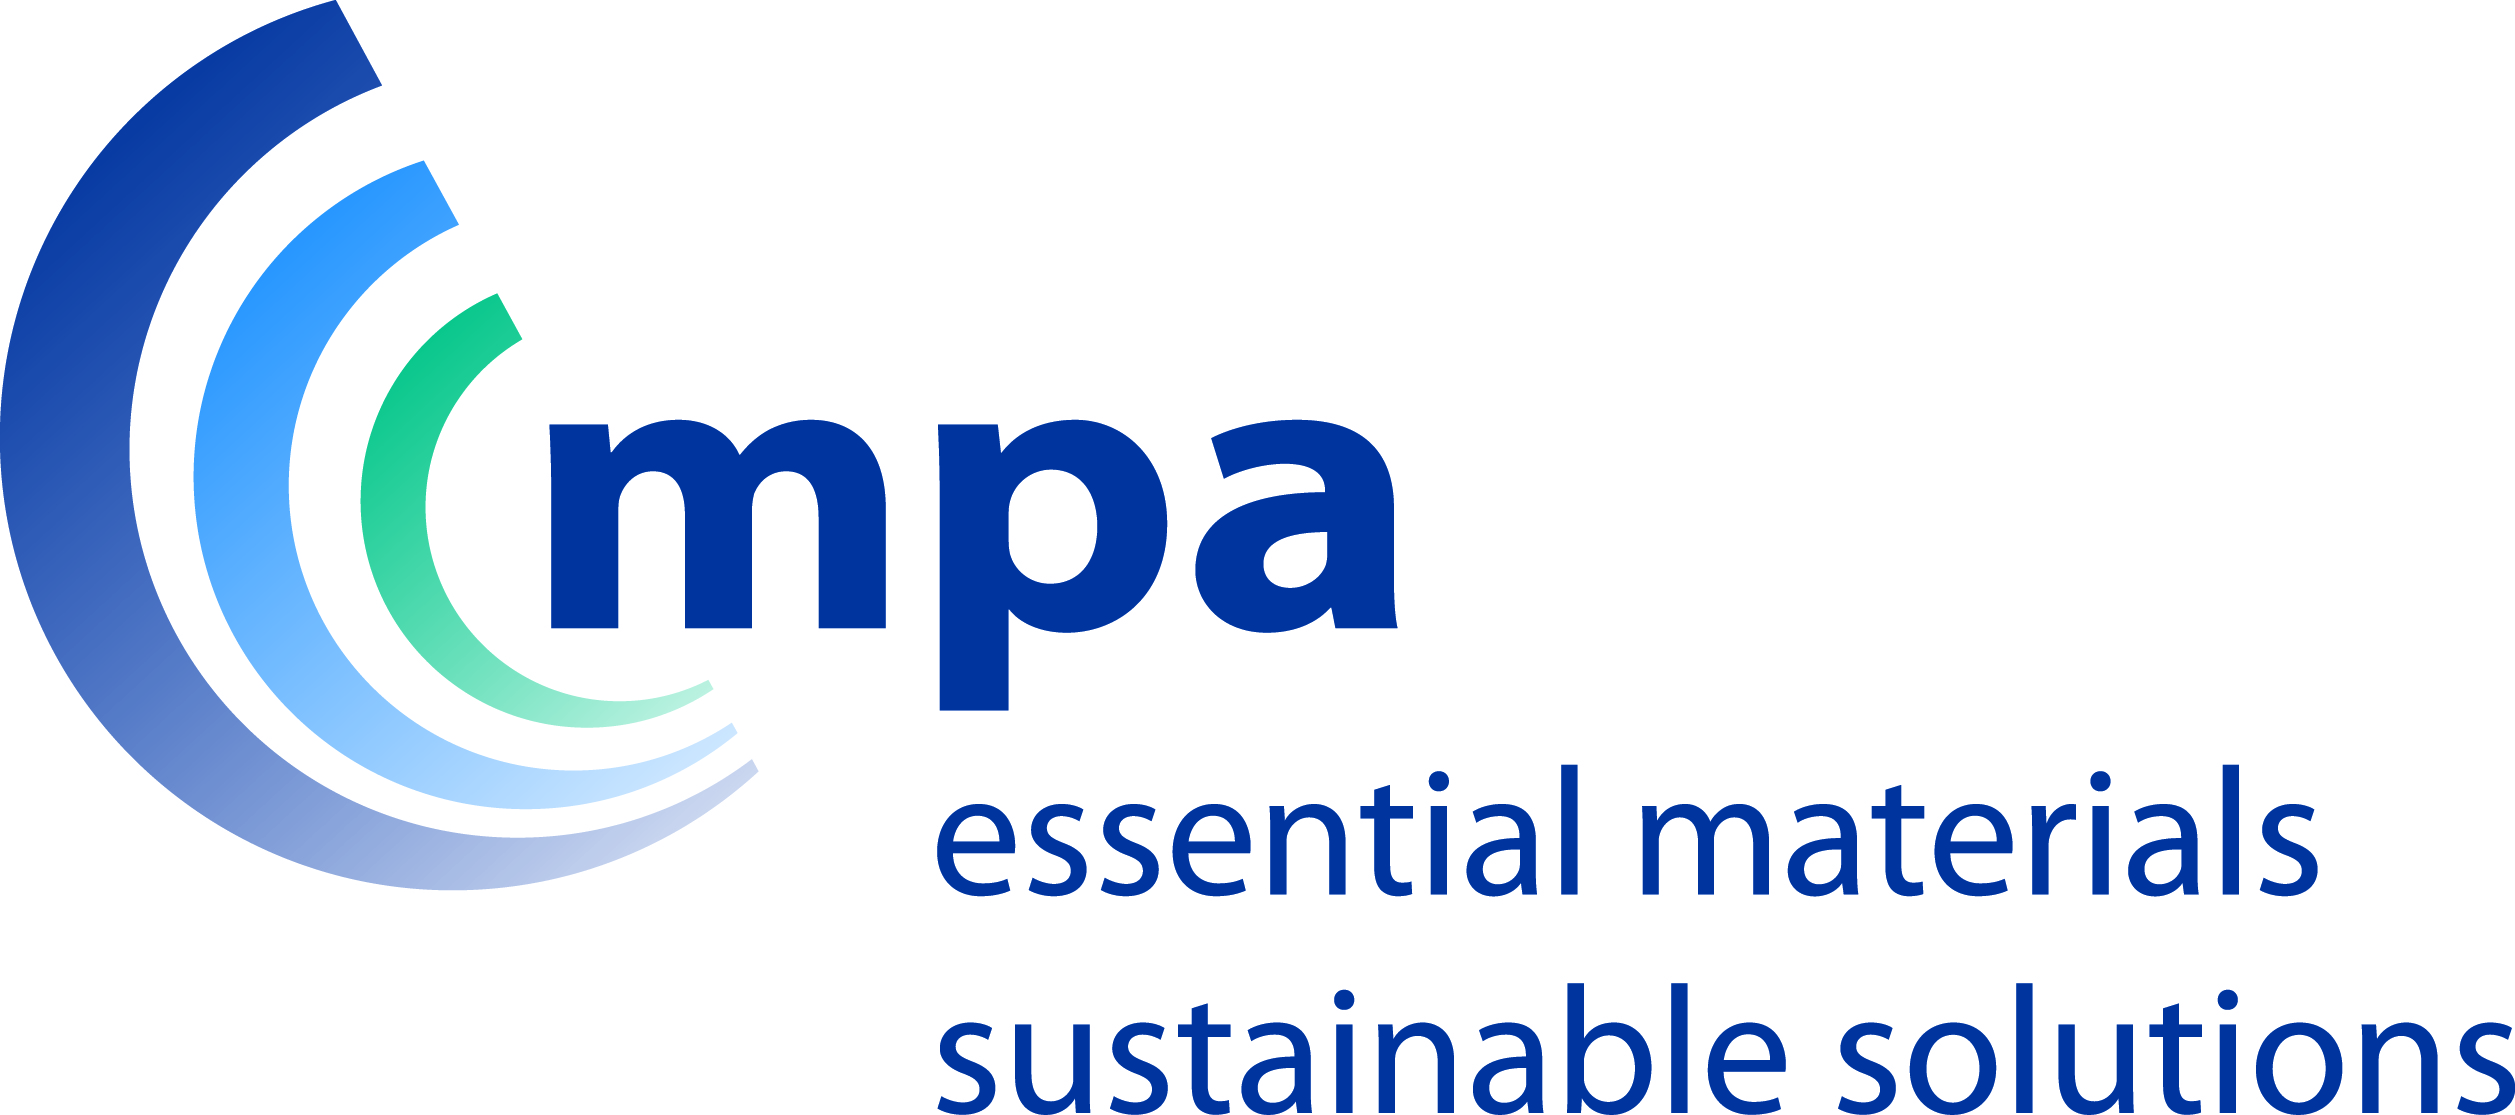  The MPA is seeking the production of up-to-date forecasts for future demand from housebuilding and infrastructure